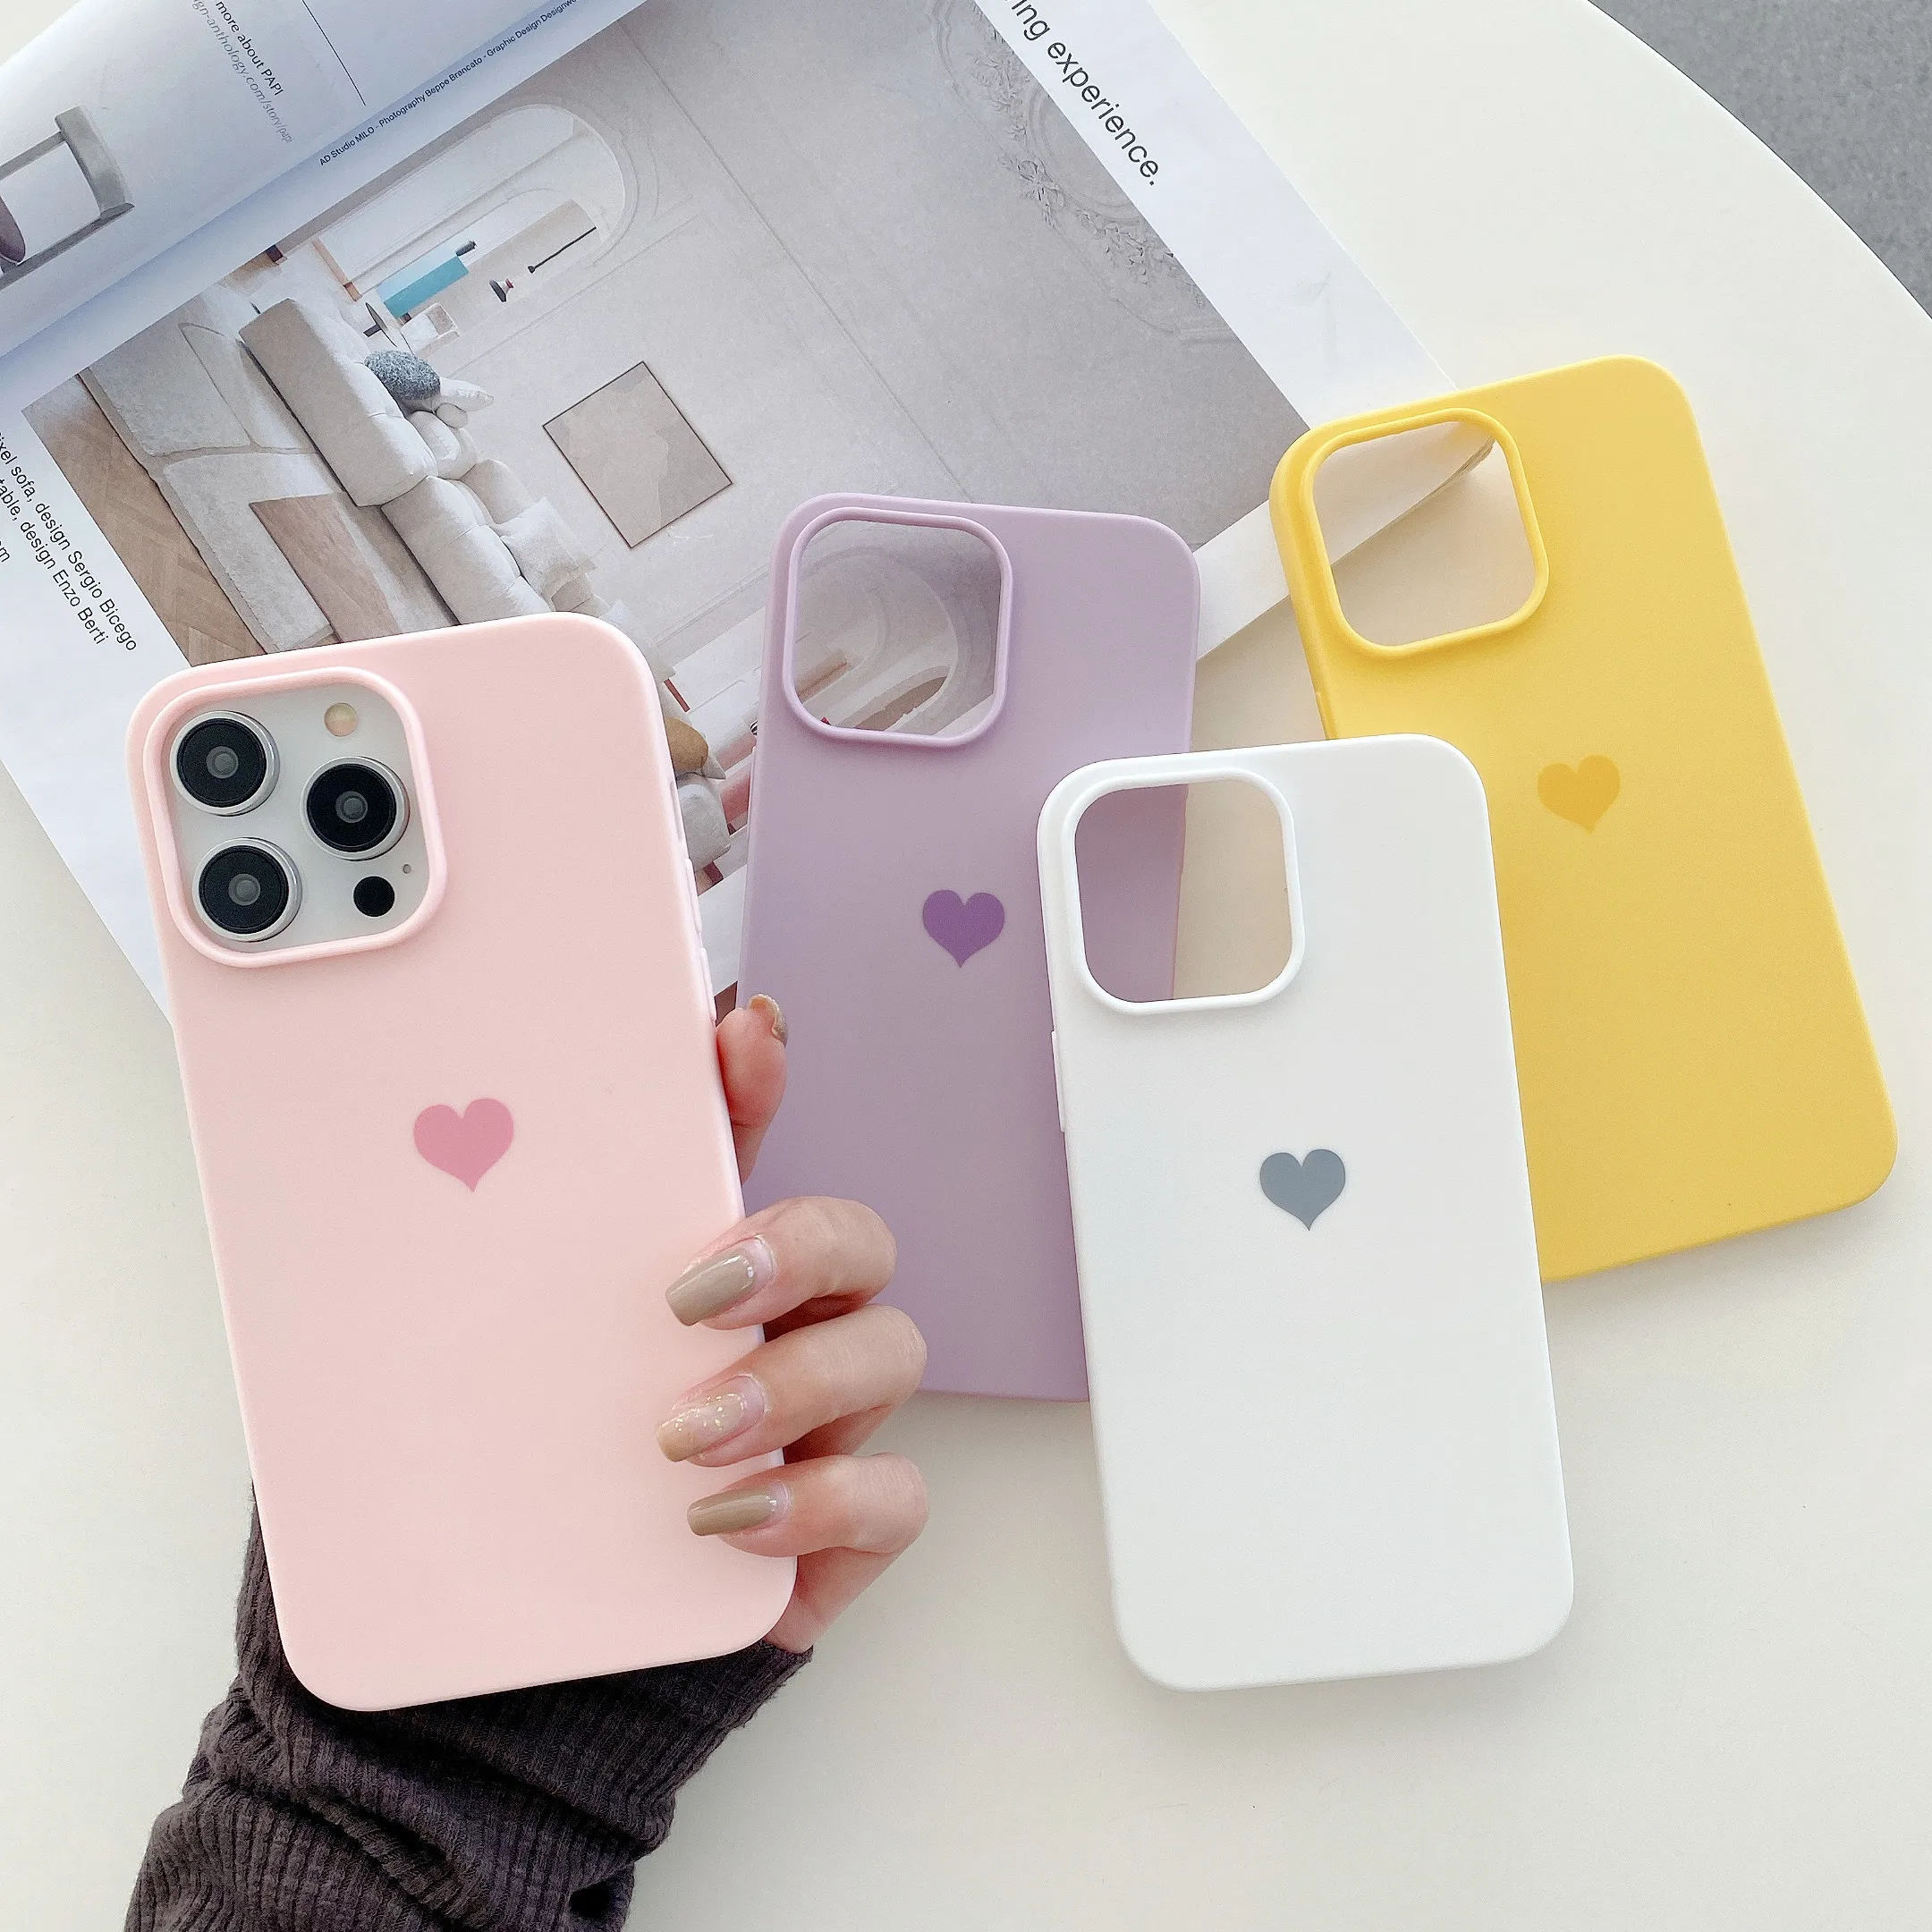 

Love Heart Soft Phone Case For iPhone 11 12 13 14 Pro Max XS Max X XR 6 7 8 Plus SE 12Mini Shockproof Bumper Silicone Back Cover